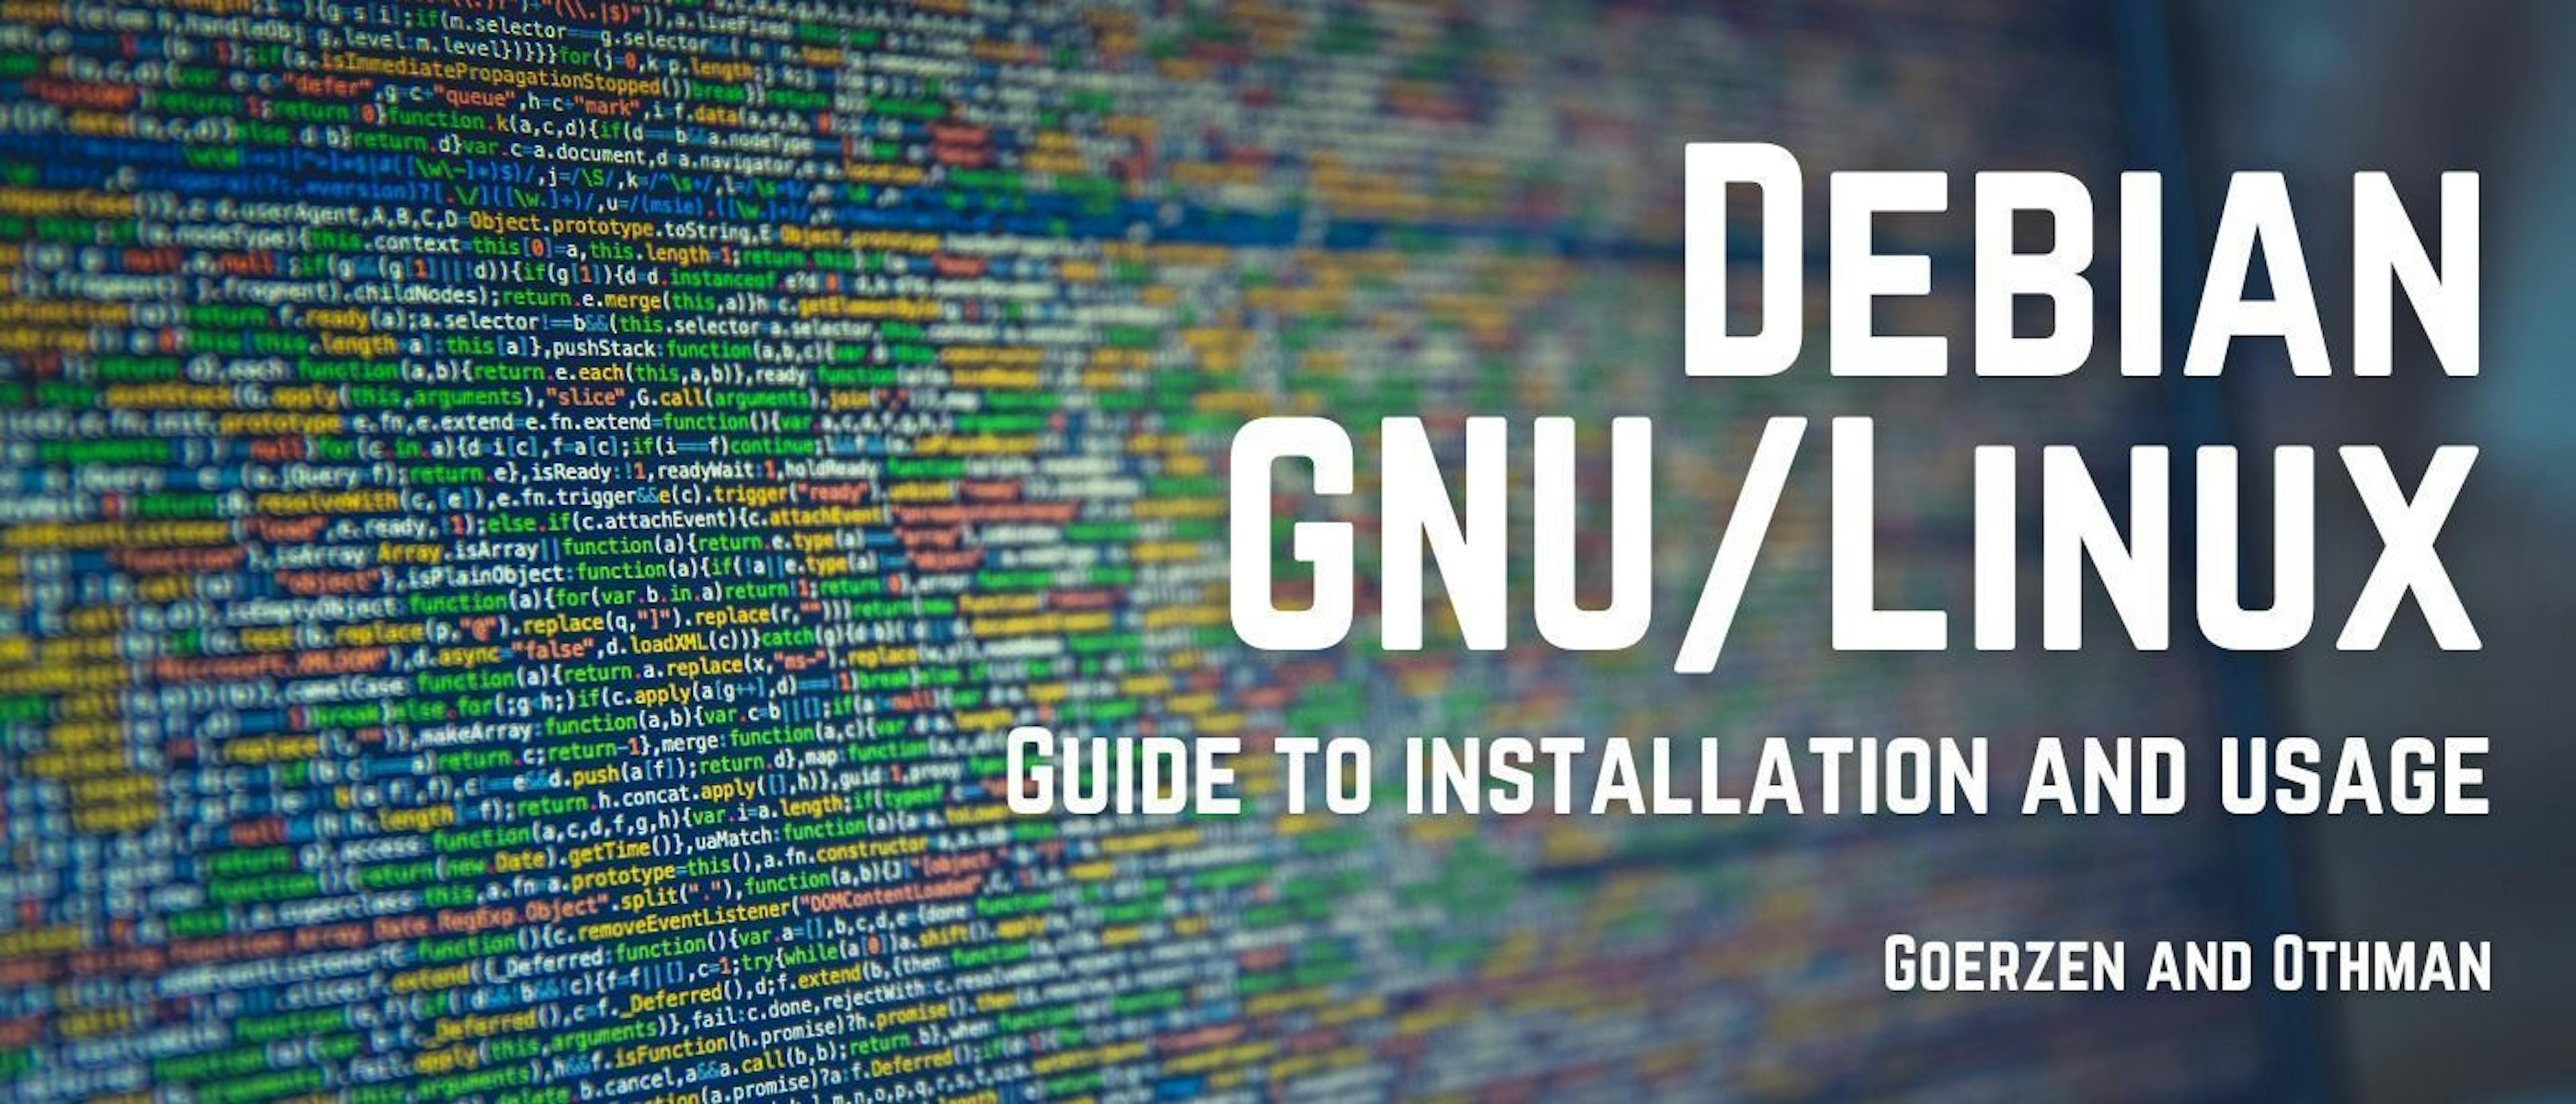 featured image - One of the key benefits of GNU/Linux over other systems lies in its networking support